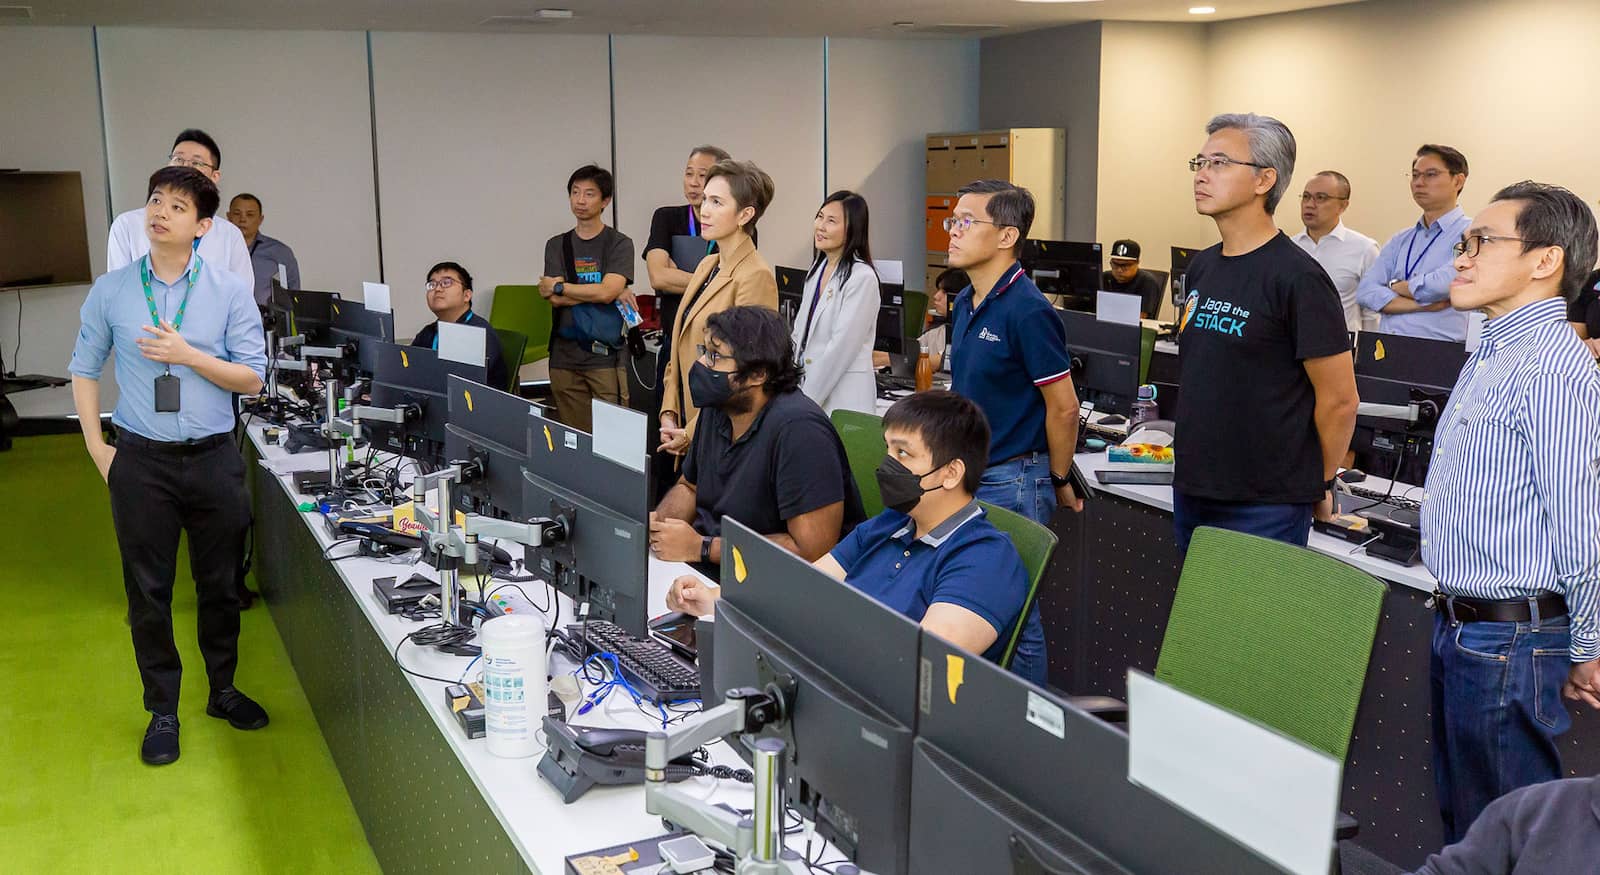 The Government Cybersecurity Operations Centre aims to defend Singapore's government systems against cyber threats.